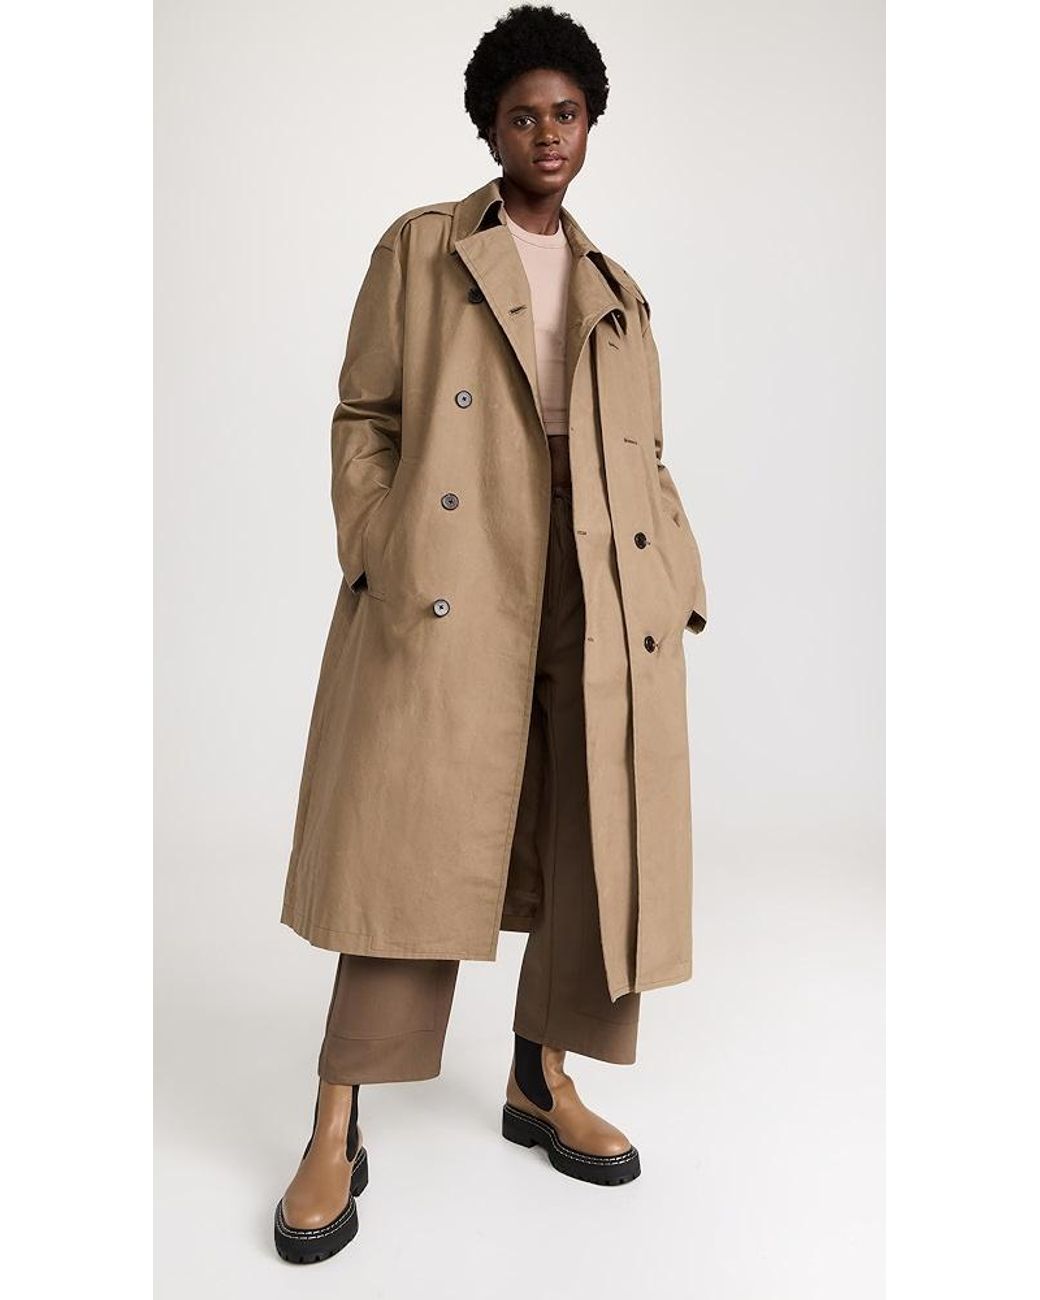 Commission Doubled Trench Coat in Natural